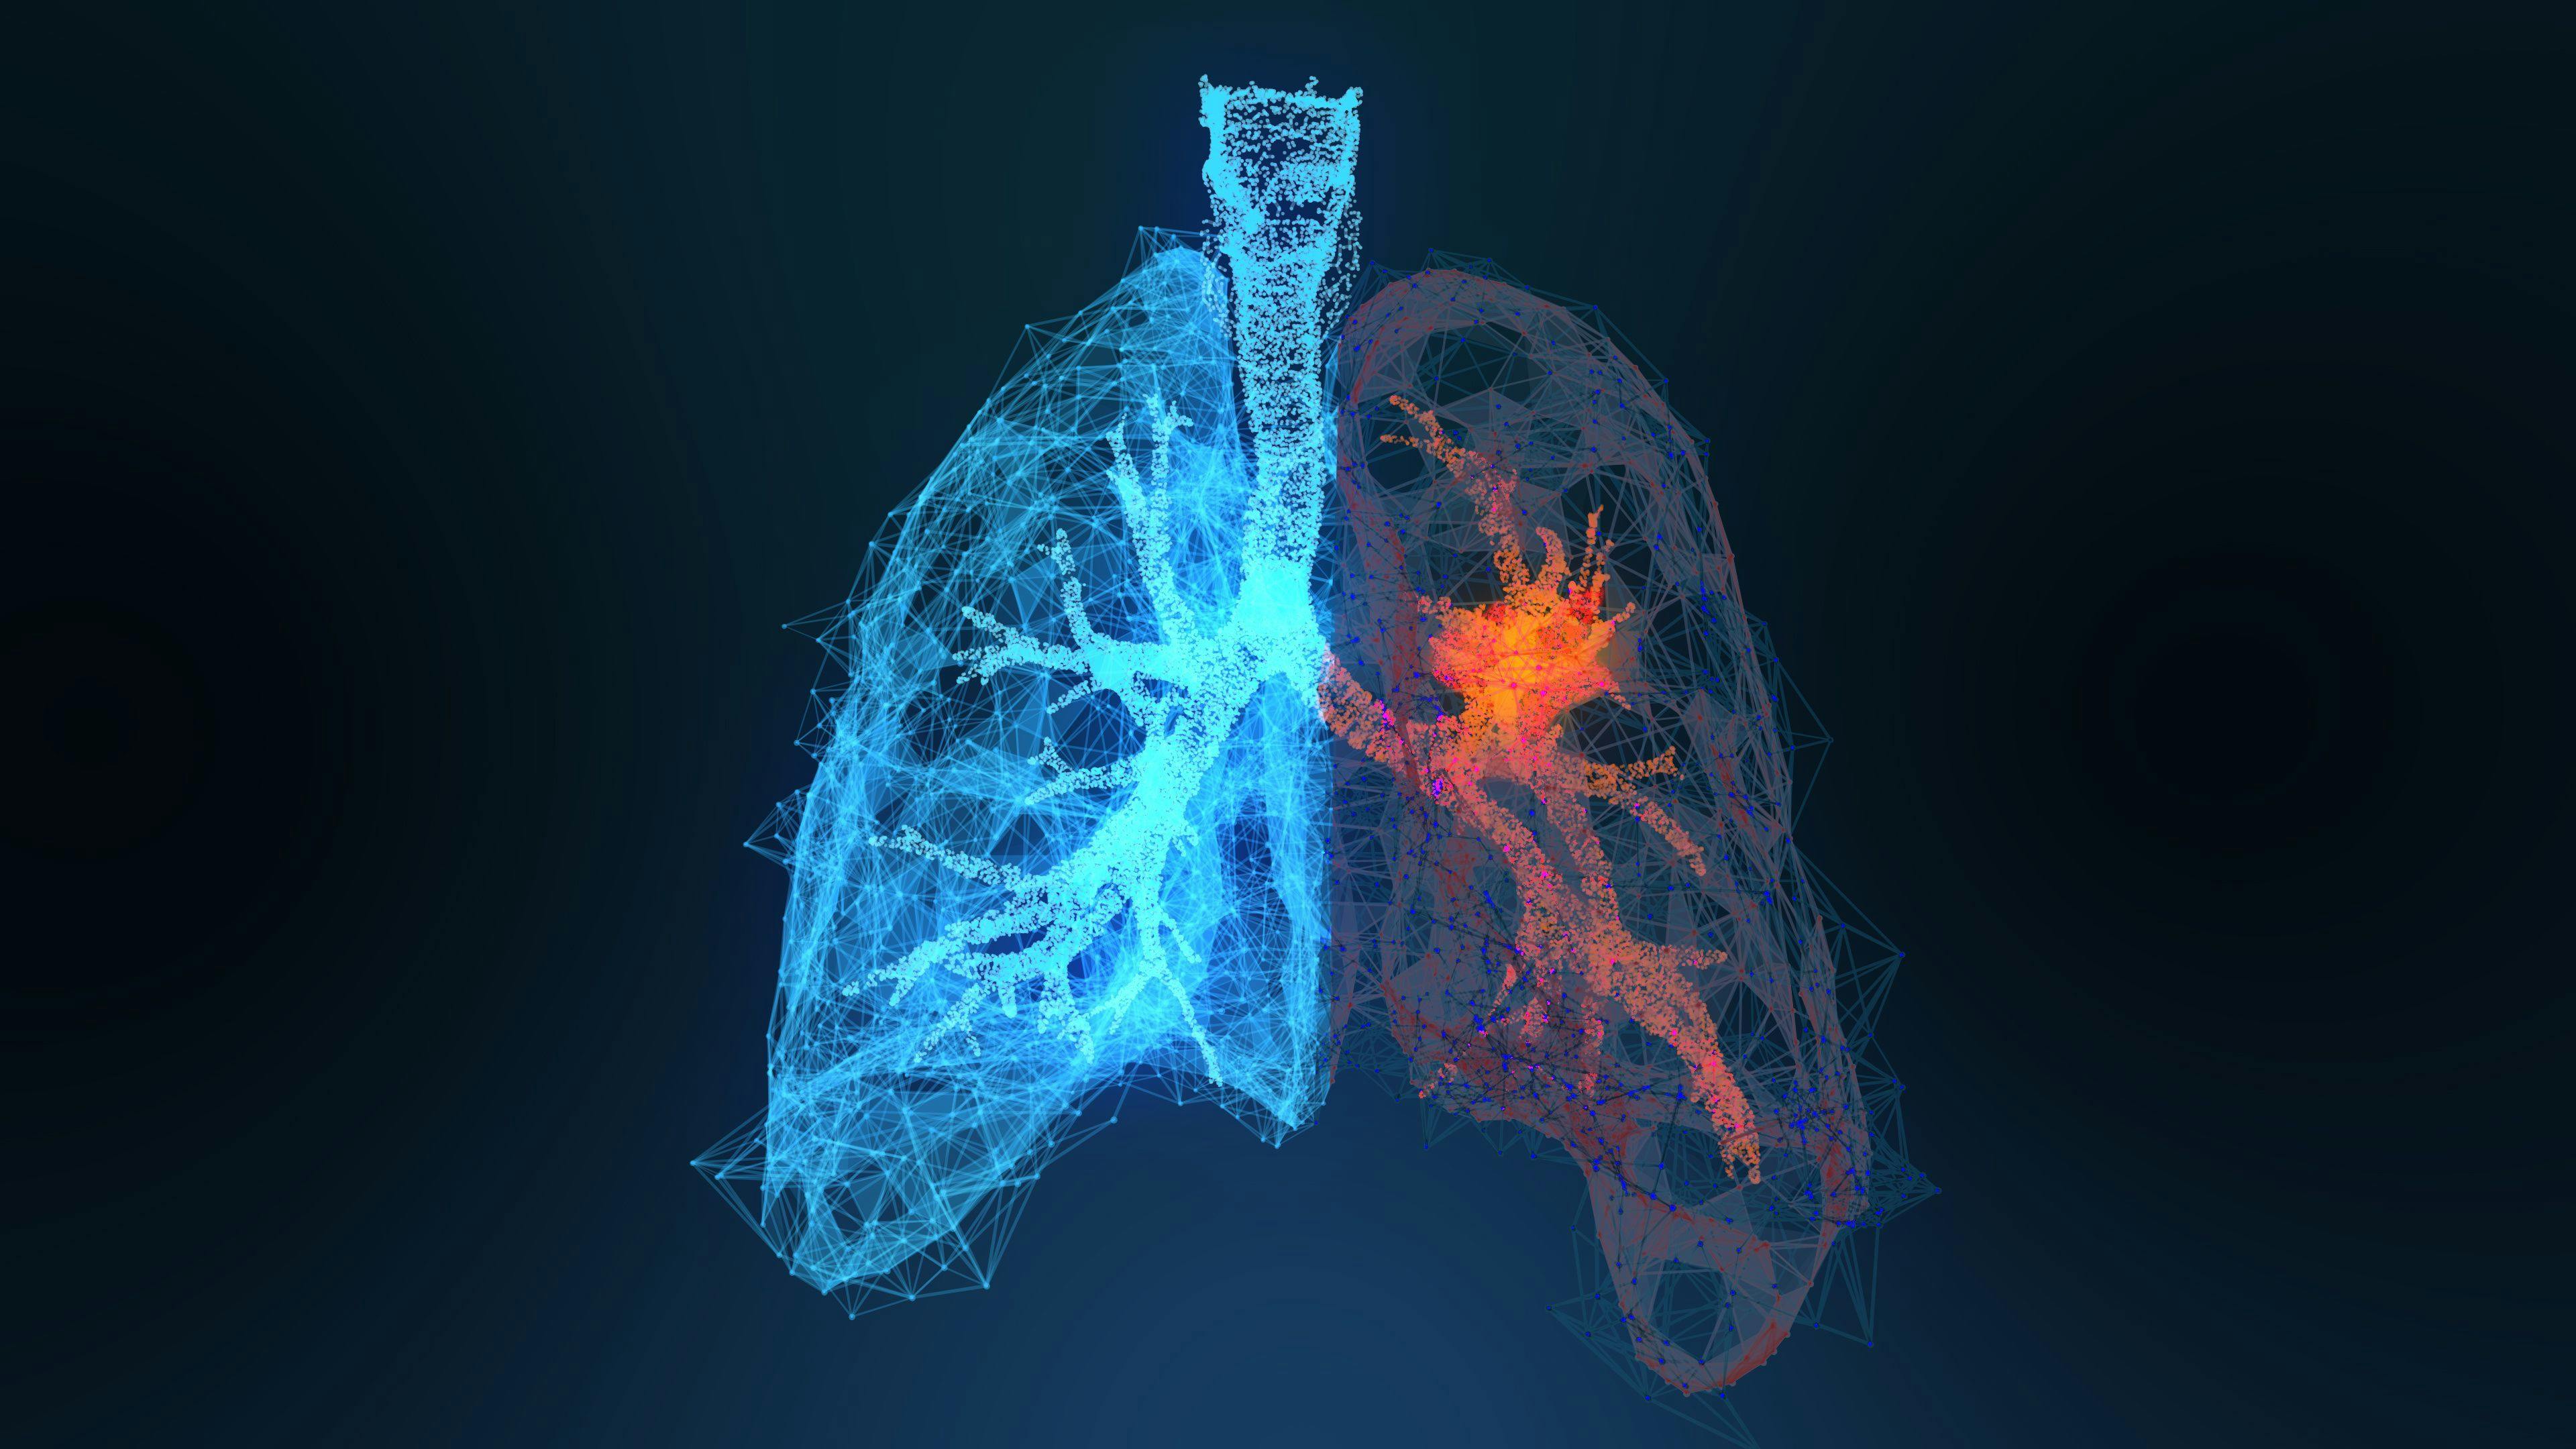 Genprex to Evaluate Higher Dose of REQORSA in NSCLC 